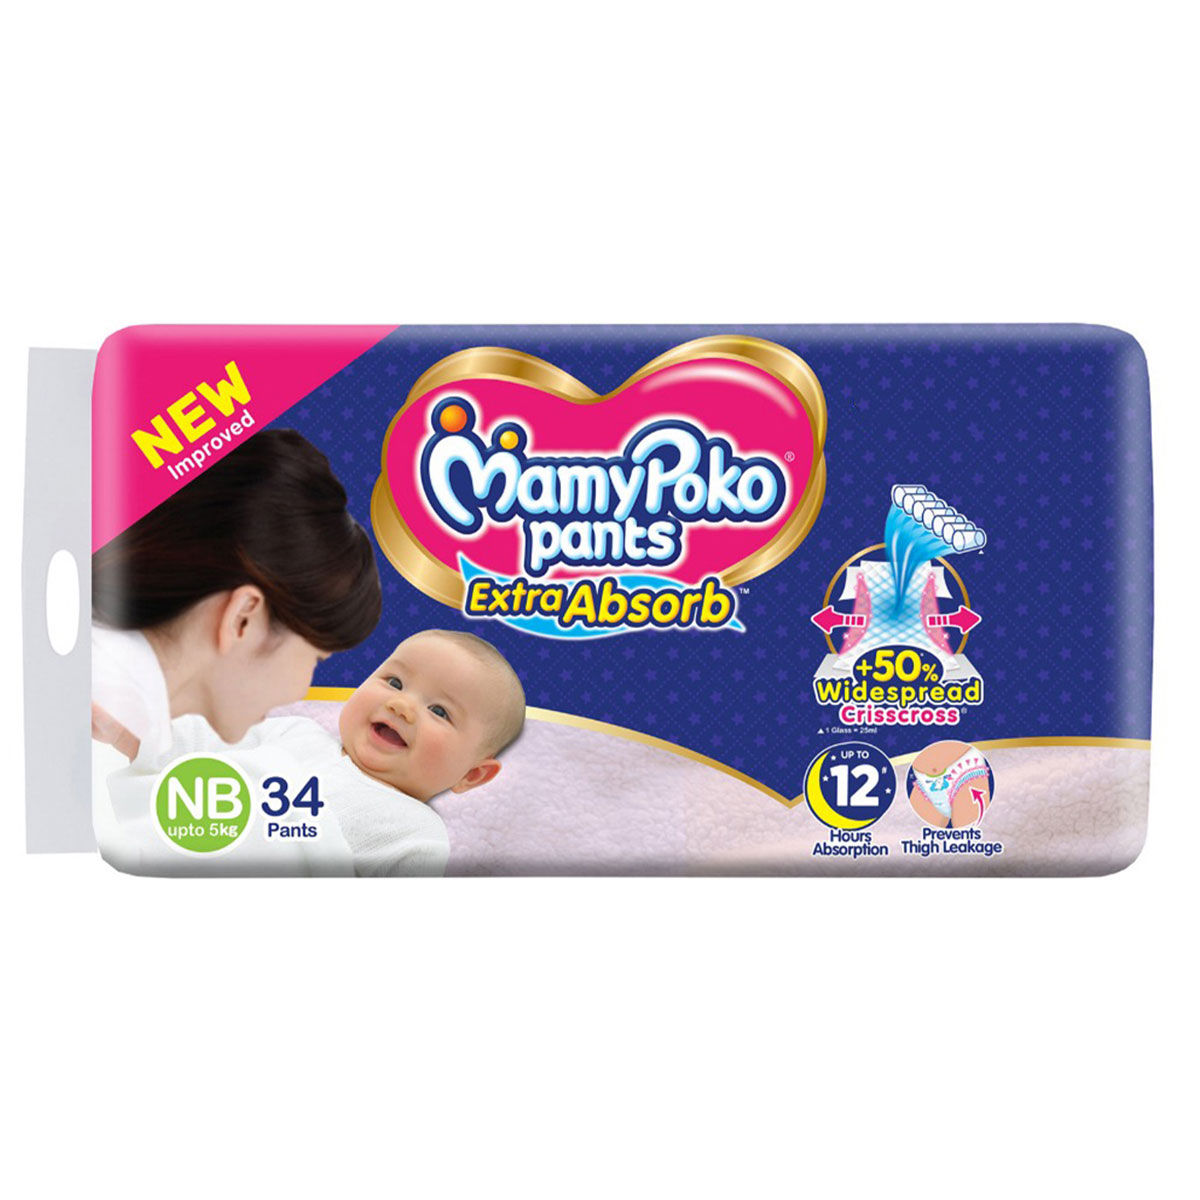 Buy Mamypoko Pants Baby Diaper 18 CountNb1 1820S Online at Low Prices  in India  Amazonin